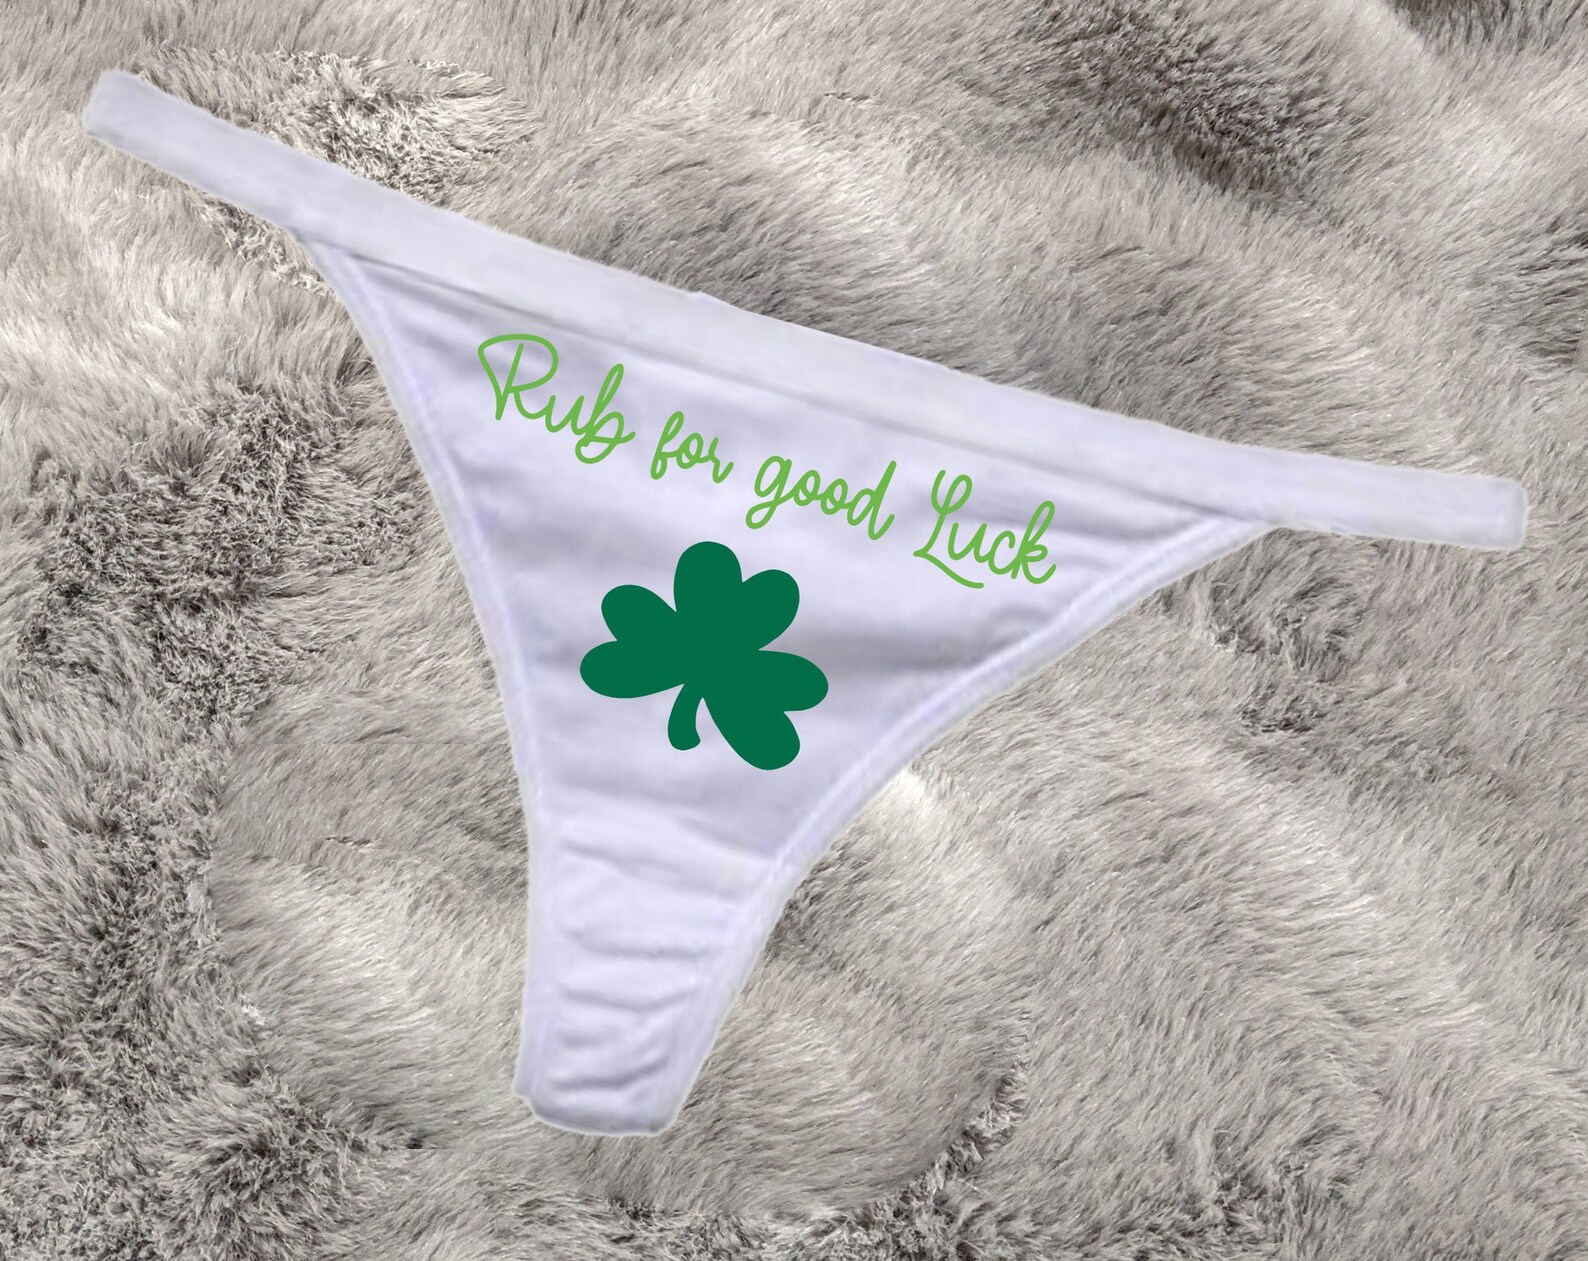 Sexy St Patrick's Day White Thong Rub for Good Luck | Etsy